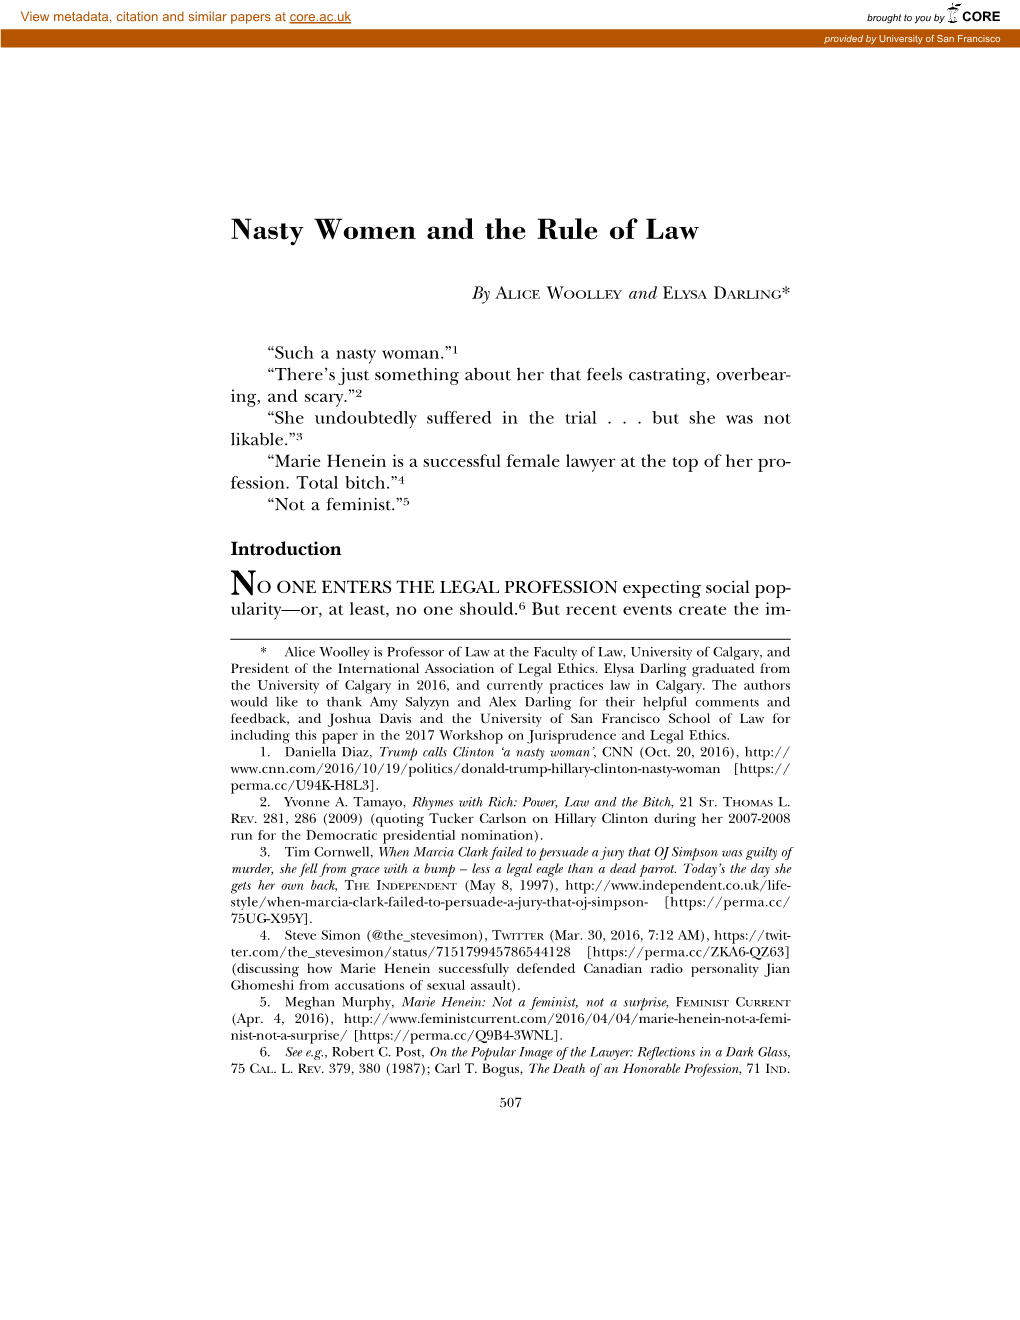 Nasty Women and the Rule of Law